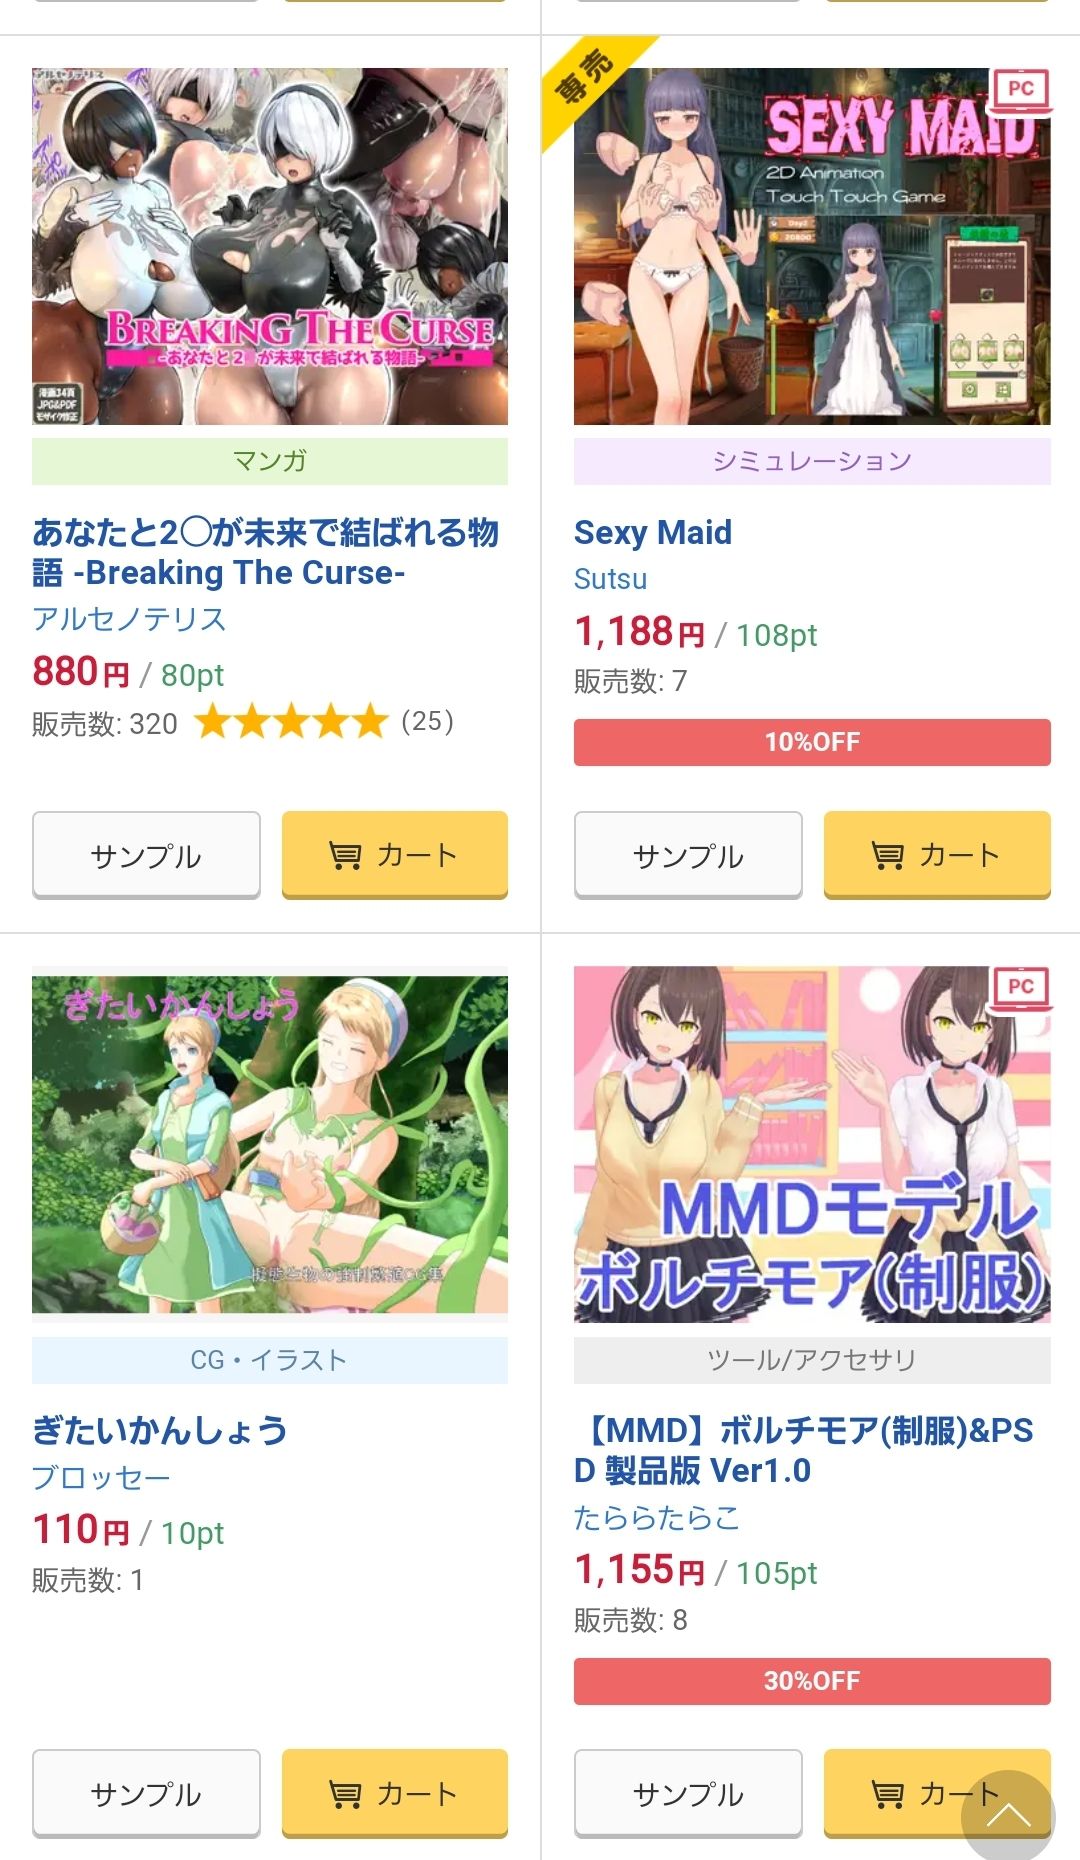 【Good news】Doujin eroge, it turns out that the painting can sell even if it is 4